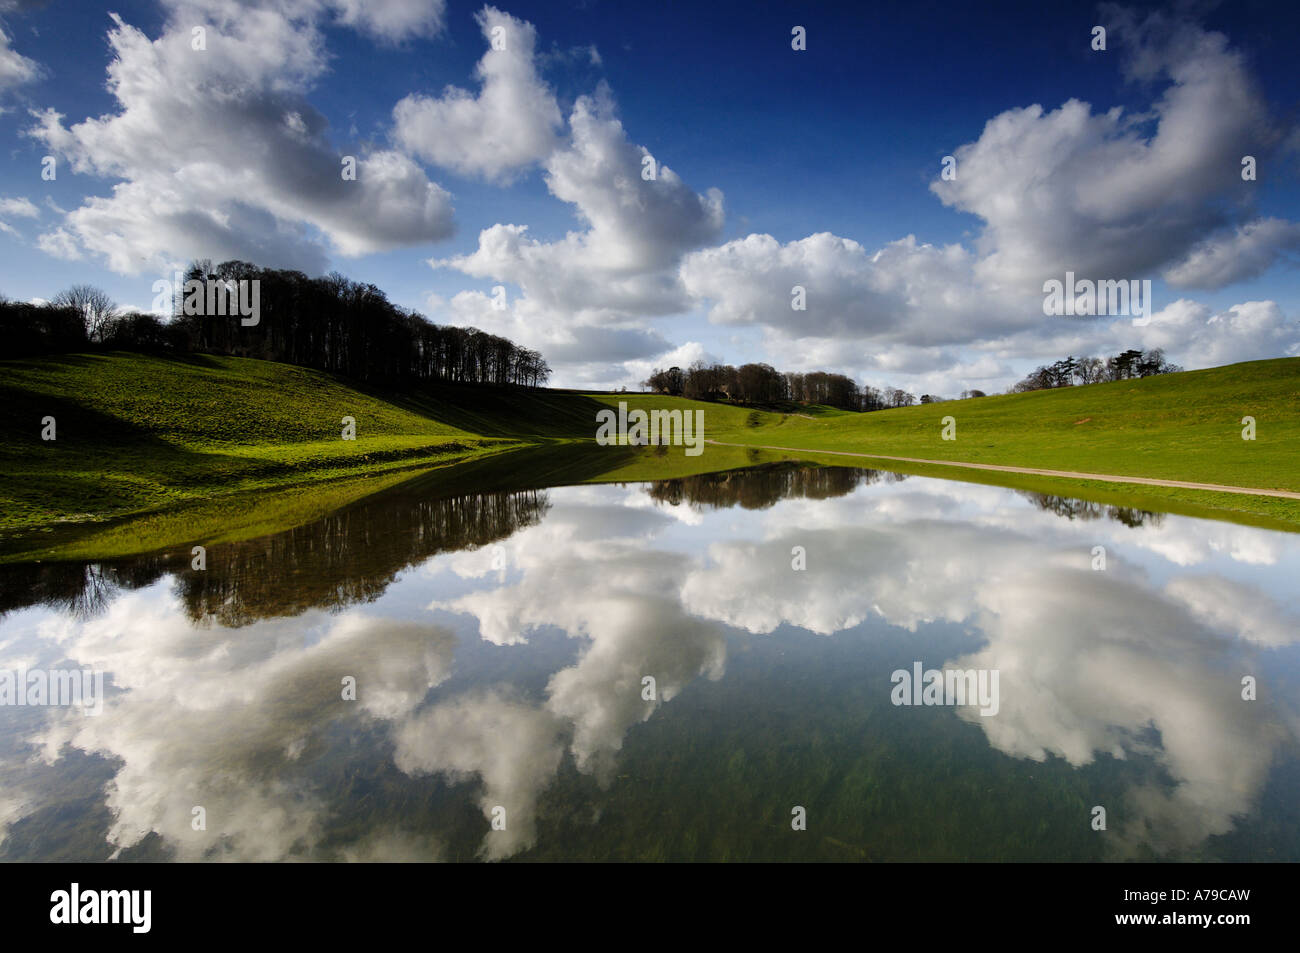 Reflection in a lake near Eastleach village in the Cotswold in England Stock Photo